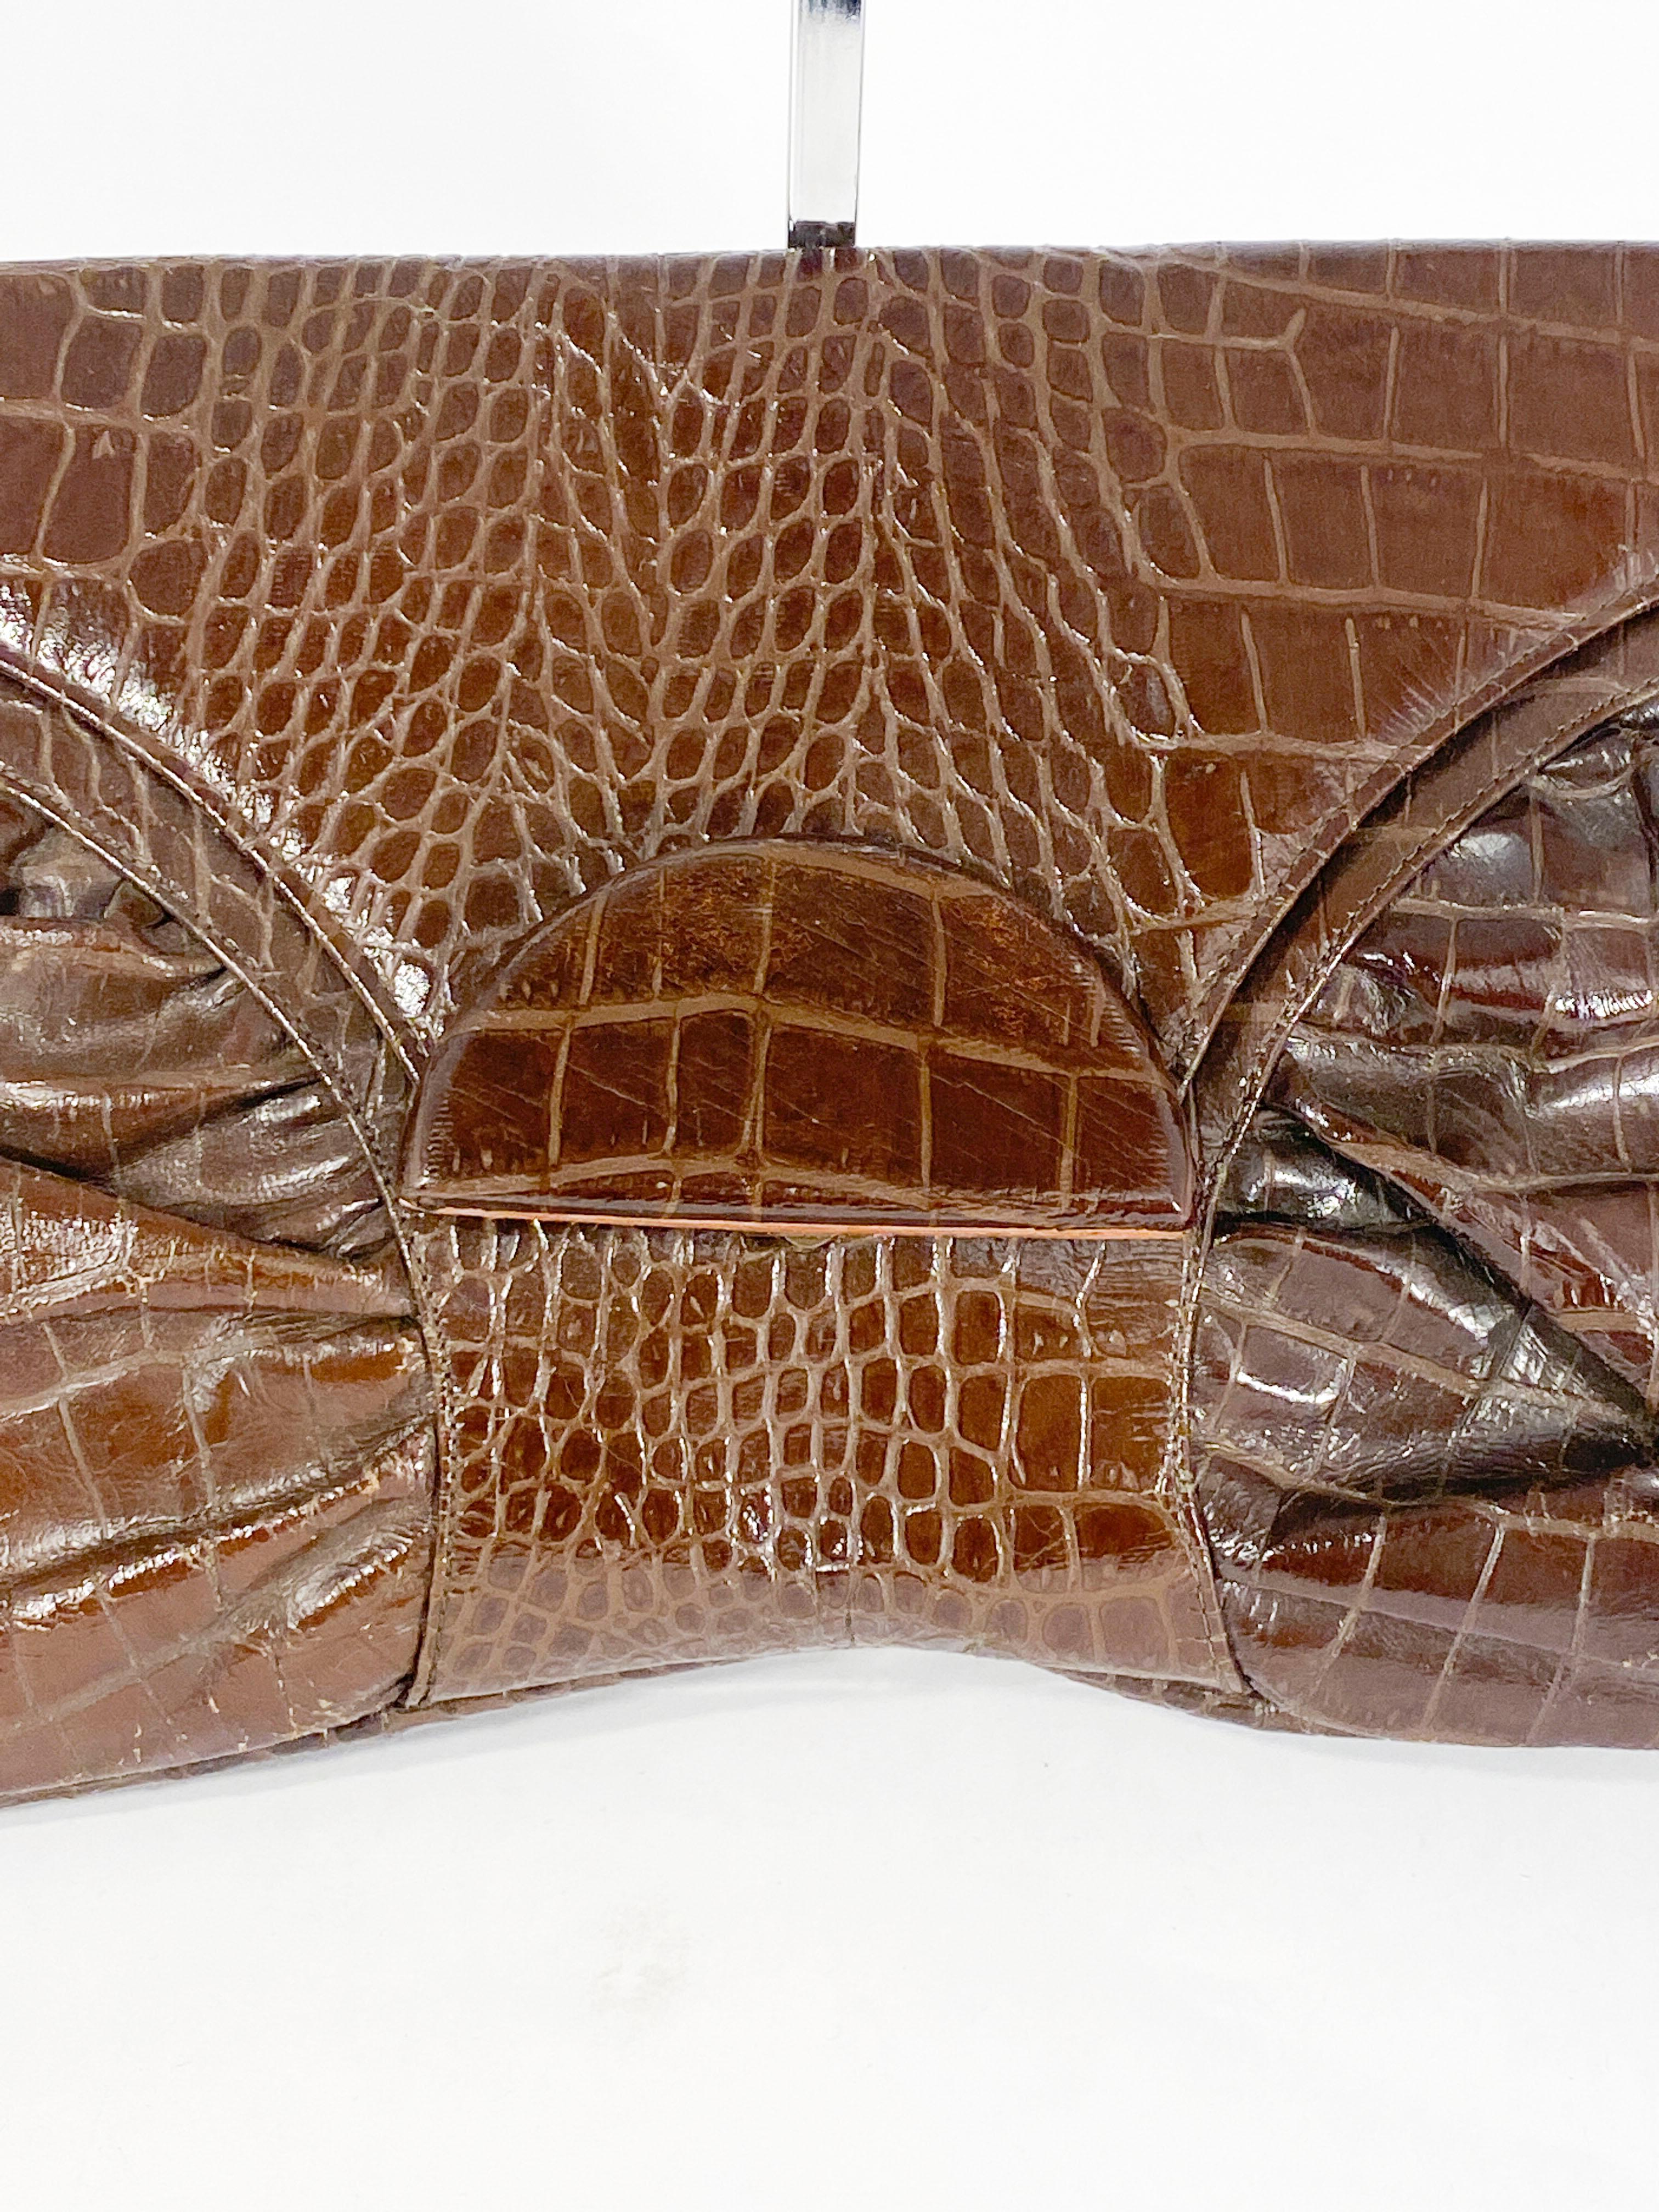 Late 1930s to early 1940s Brown oversized faux alligator envelop handbag with covered wooden clasp closure. The interior is lined with a brown twill with several pockets and a small personalized card carrier to match the purse. 